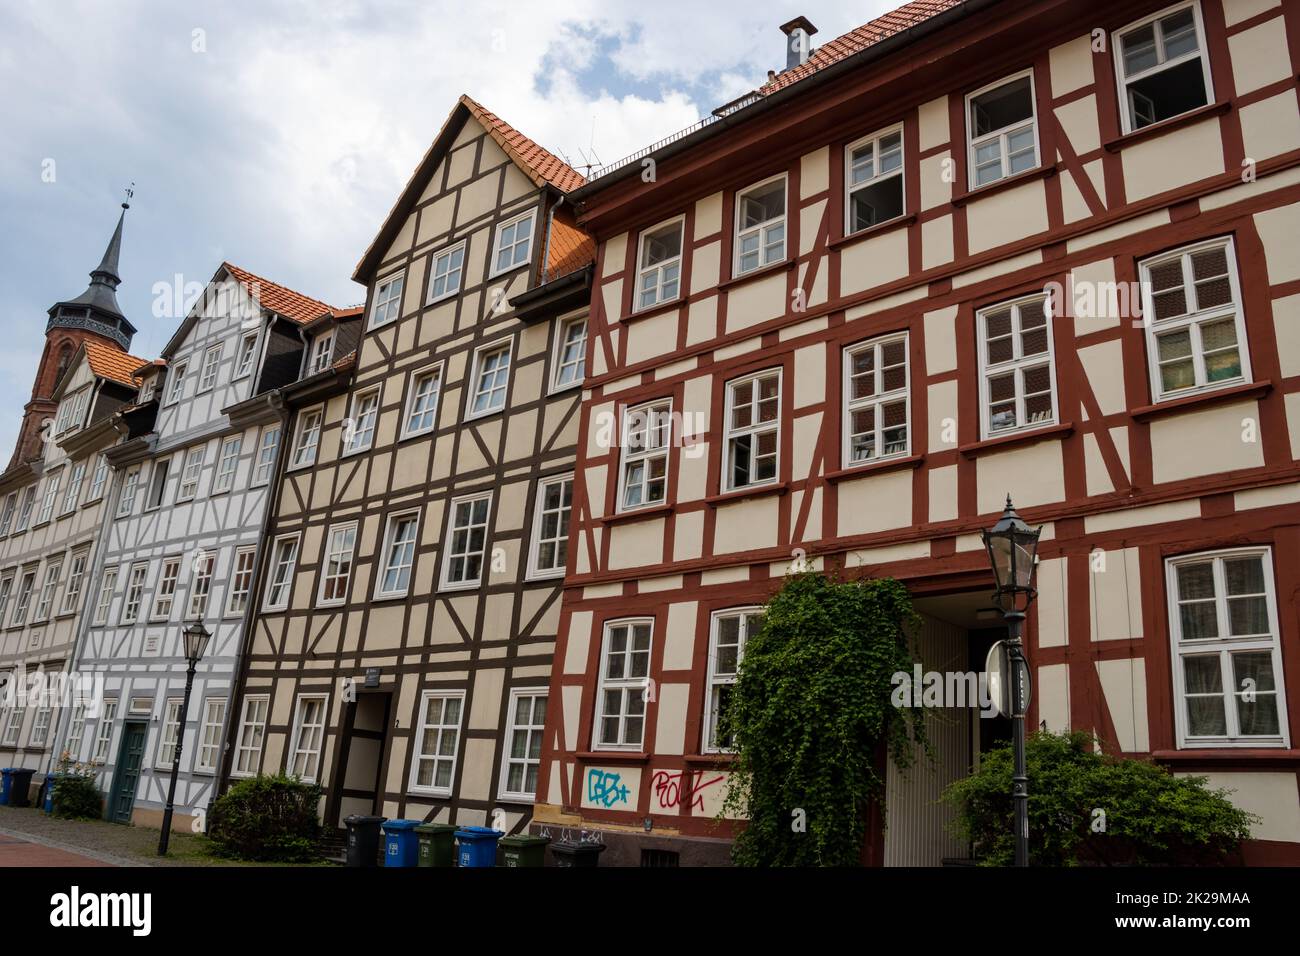 Buildings of the historic old town of Goettingen in Lower Saxony Germany Stock Photo